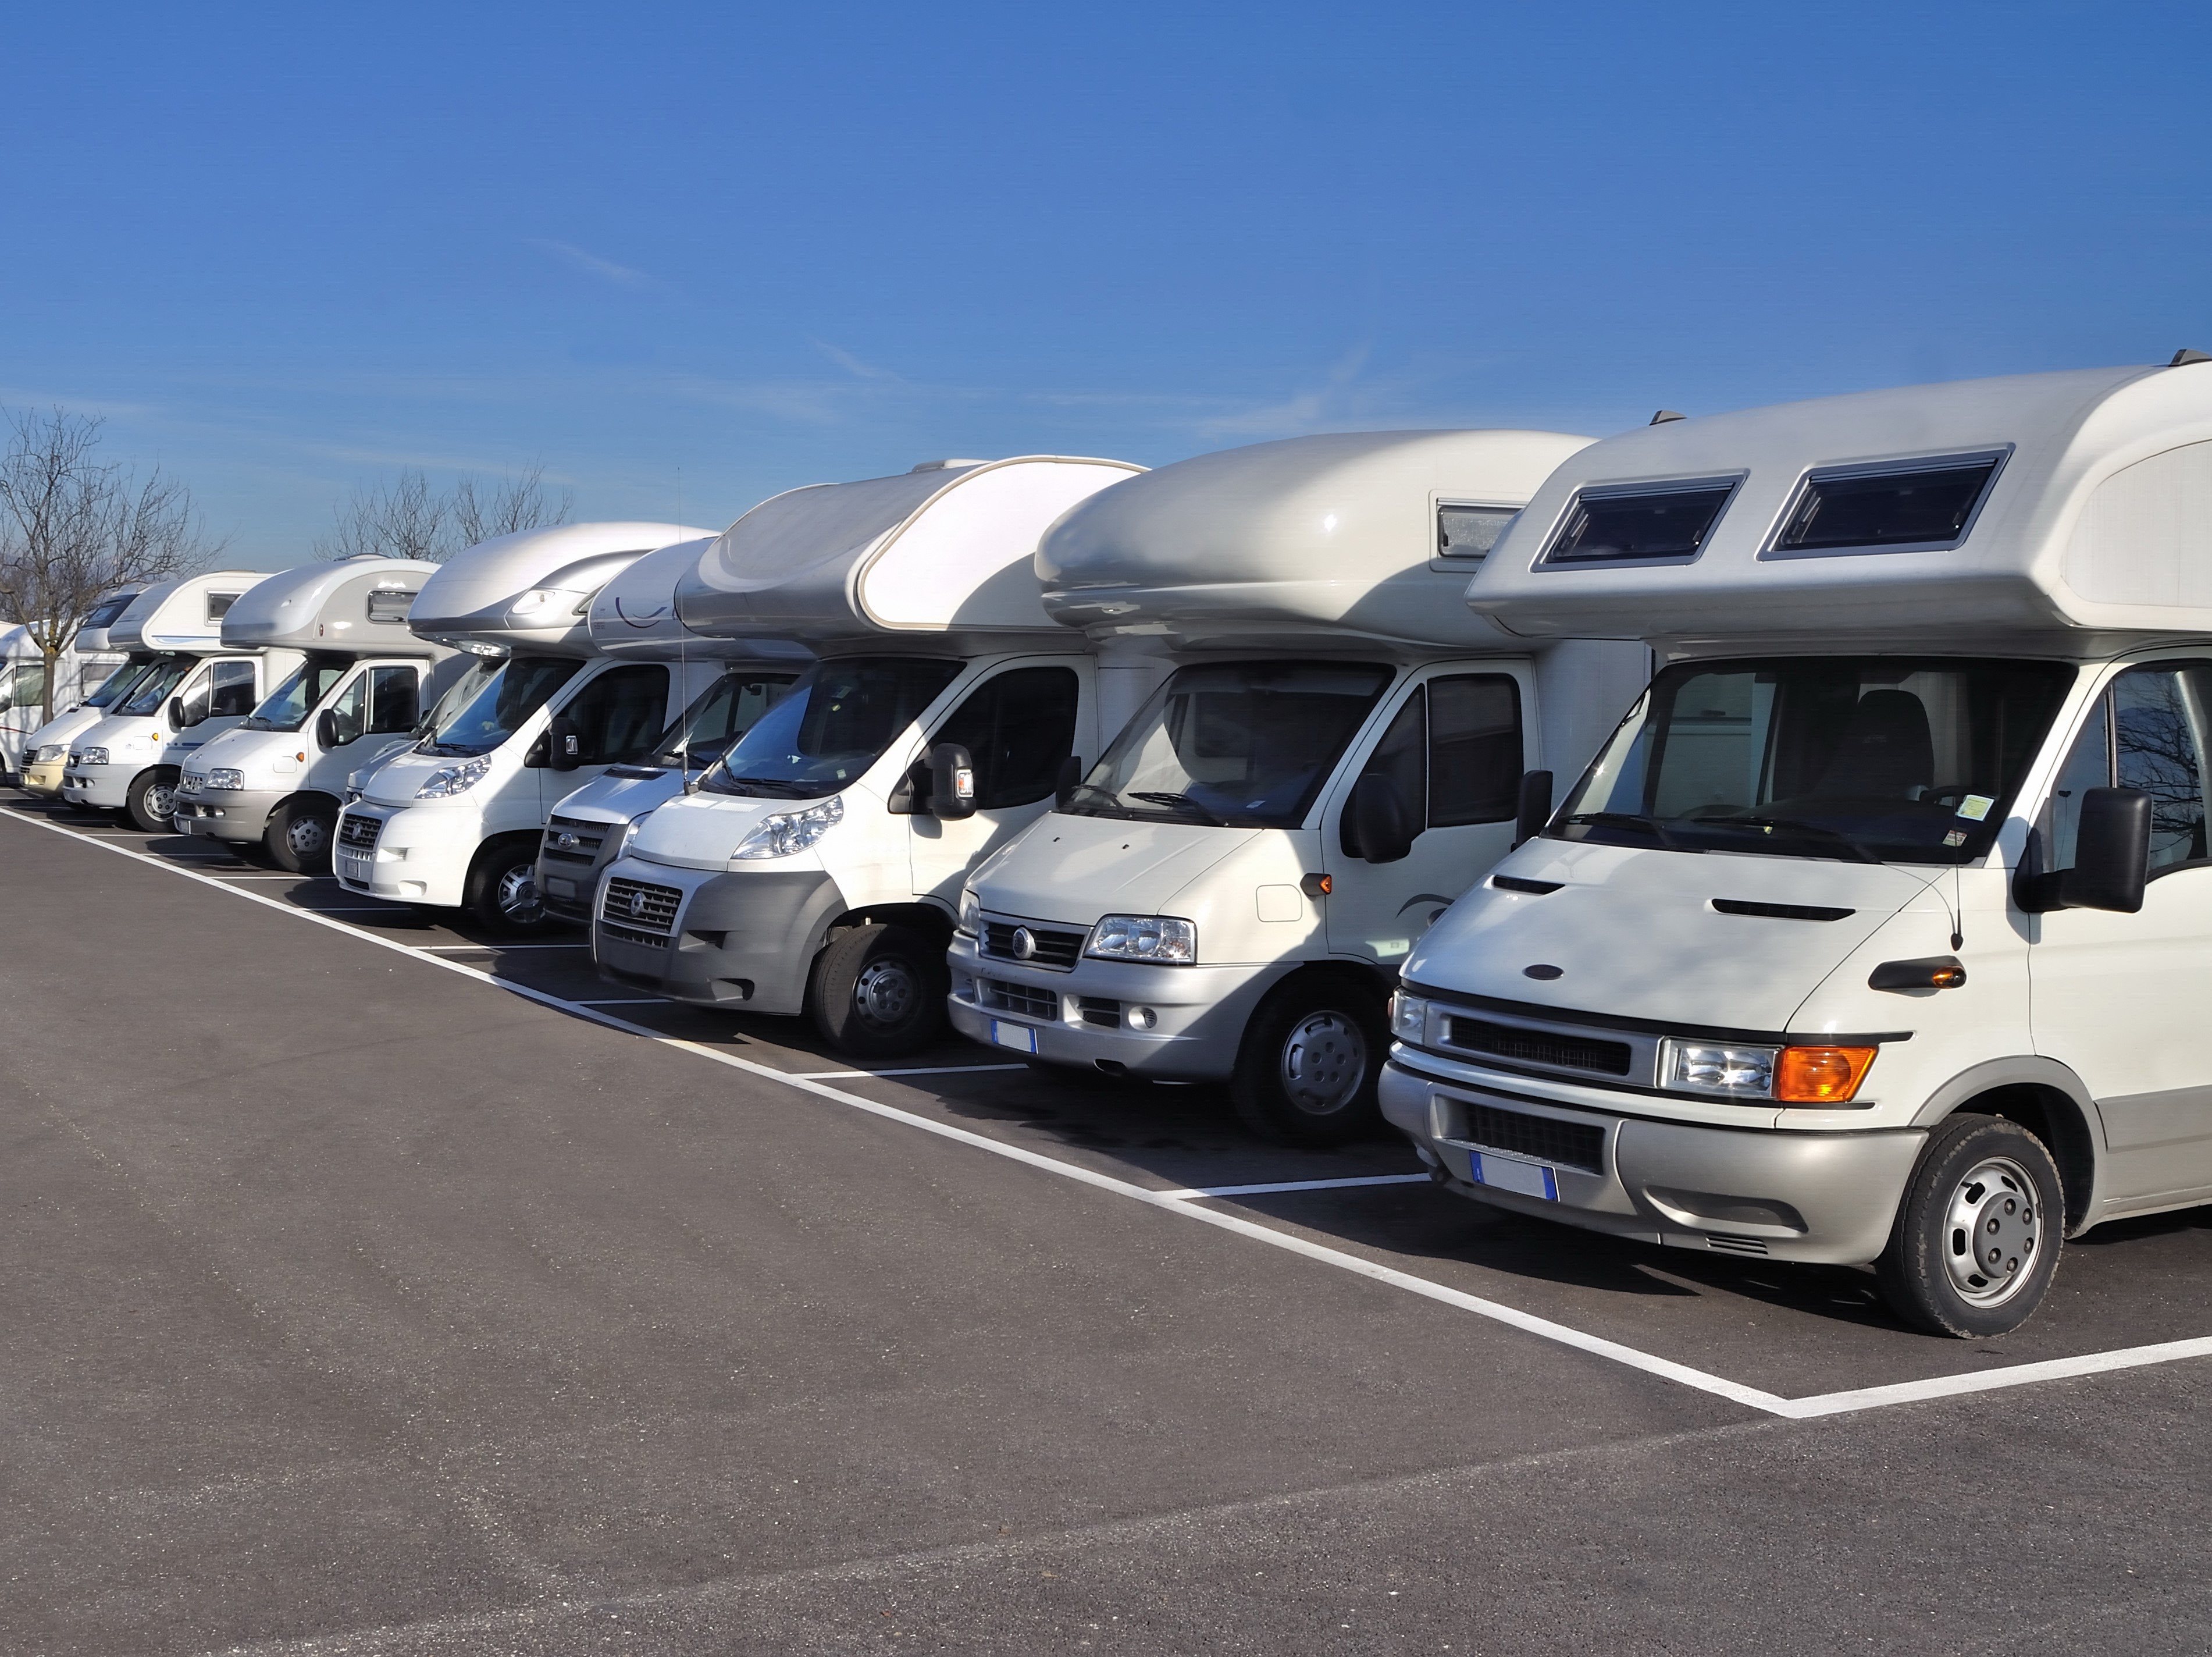 Old Highway 95 RV Storage - 24-Hour Access to Outdoor RV/Boat/Vehicle Parking in Athol, ID